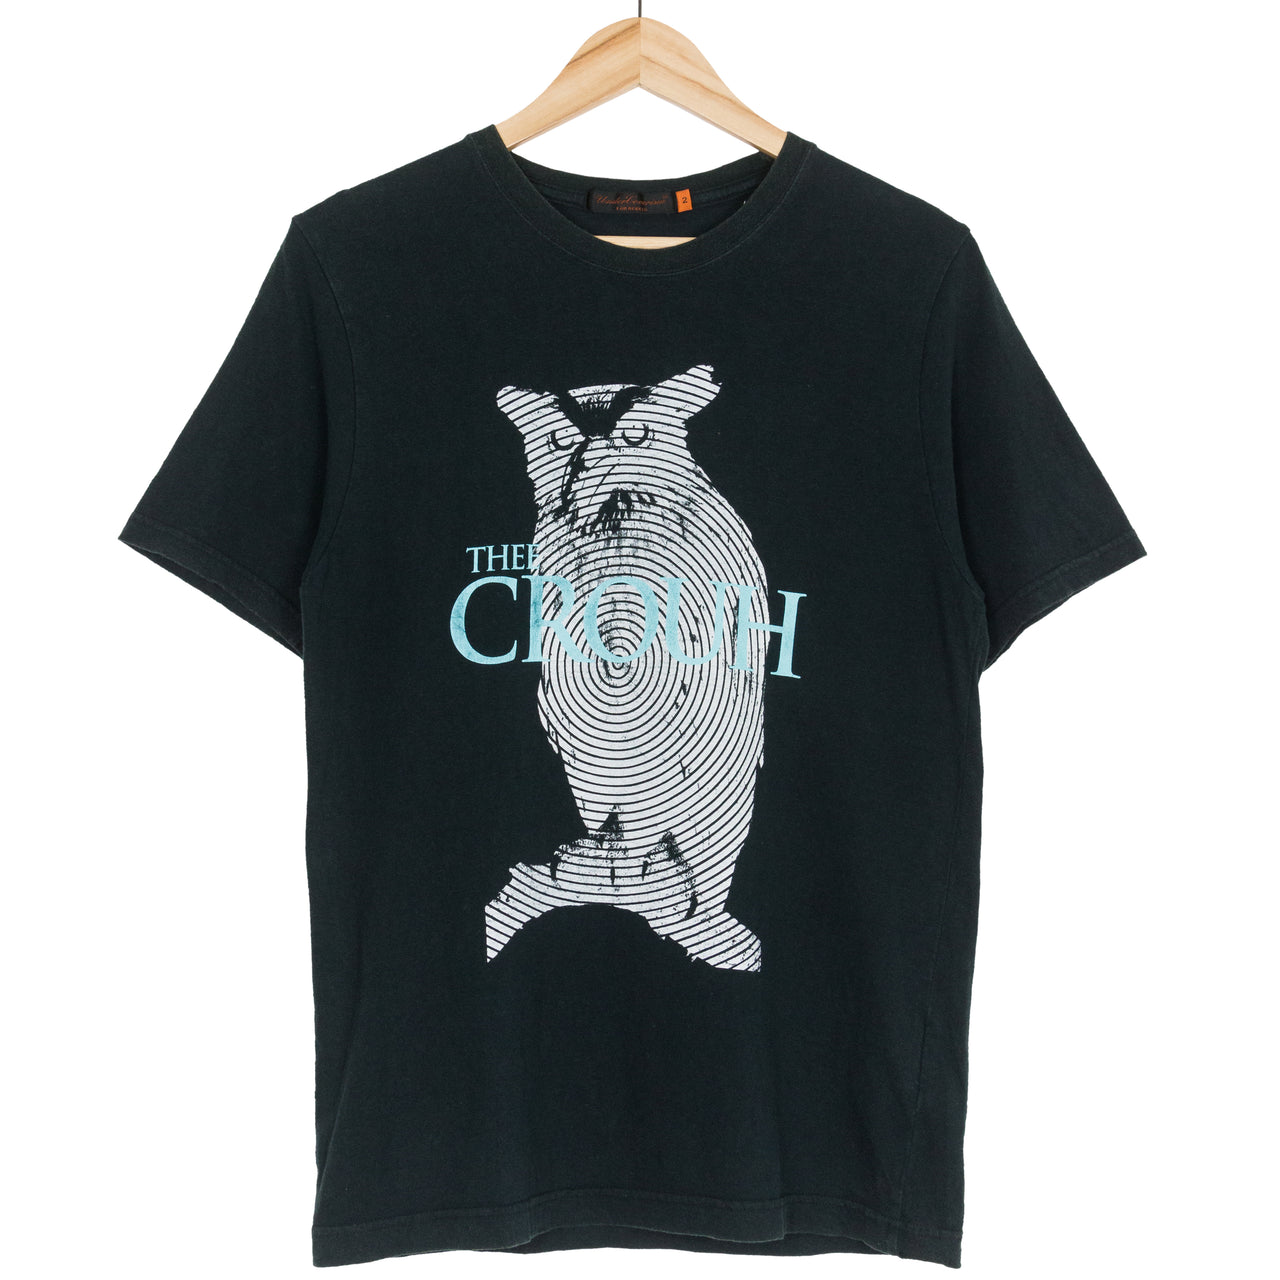 Undercover "The Crouh" Tee - SS06 "T"